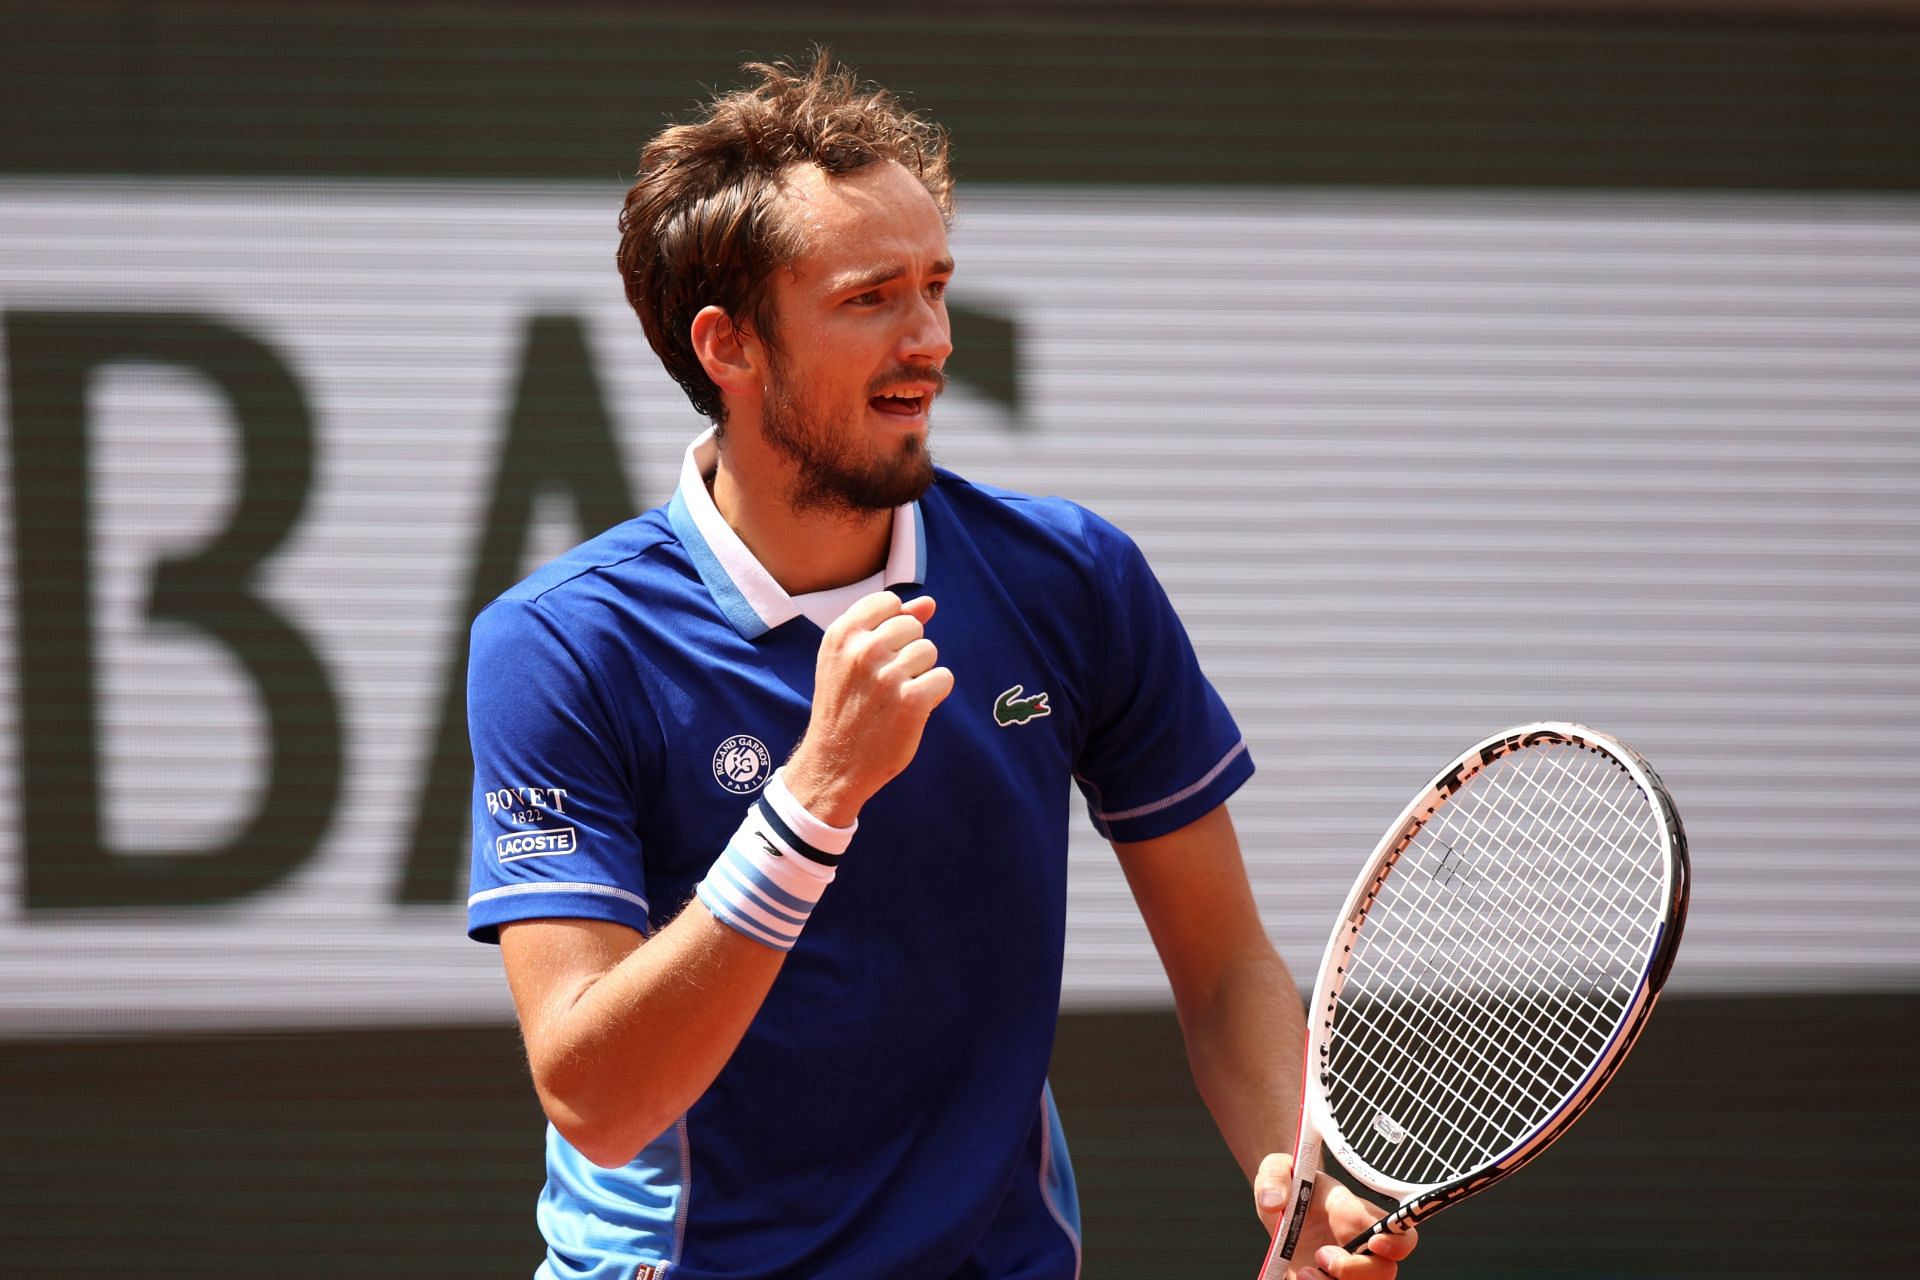 Daniil Medvedev will aim to reach his second final of 2022